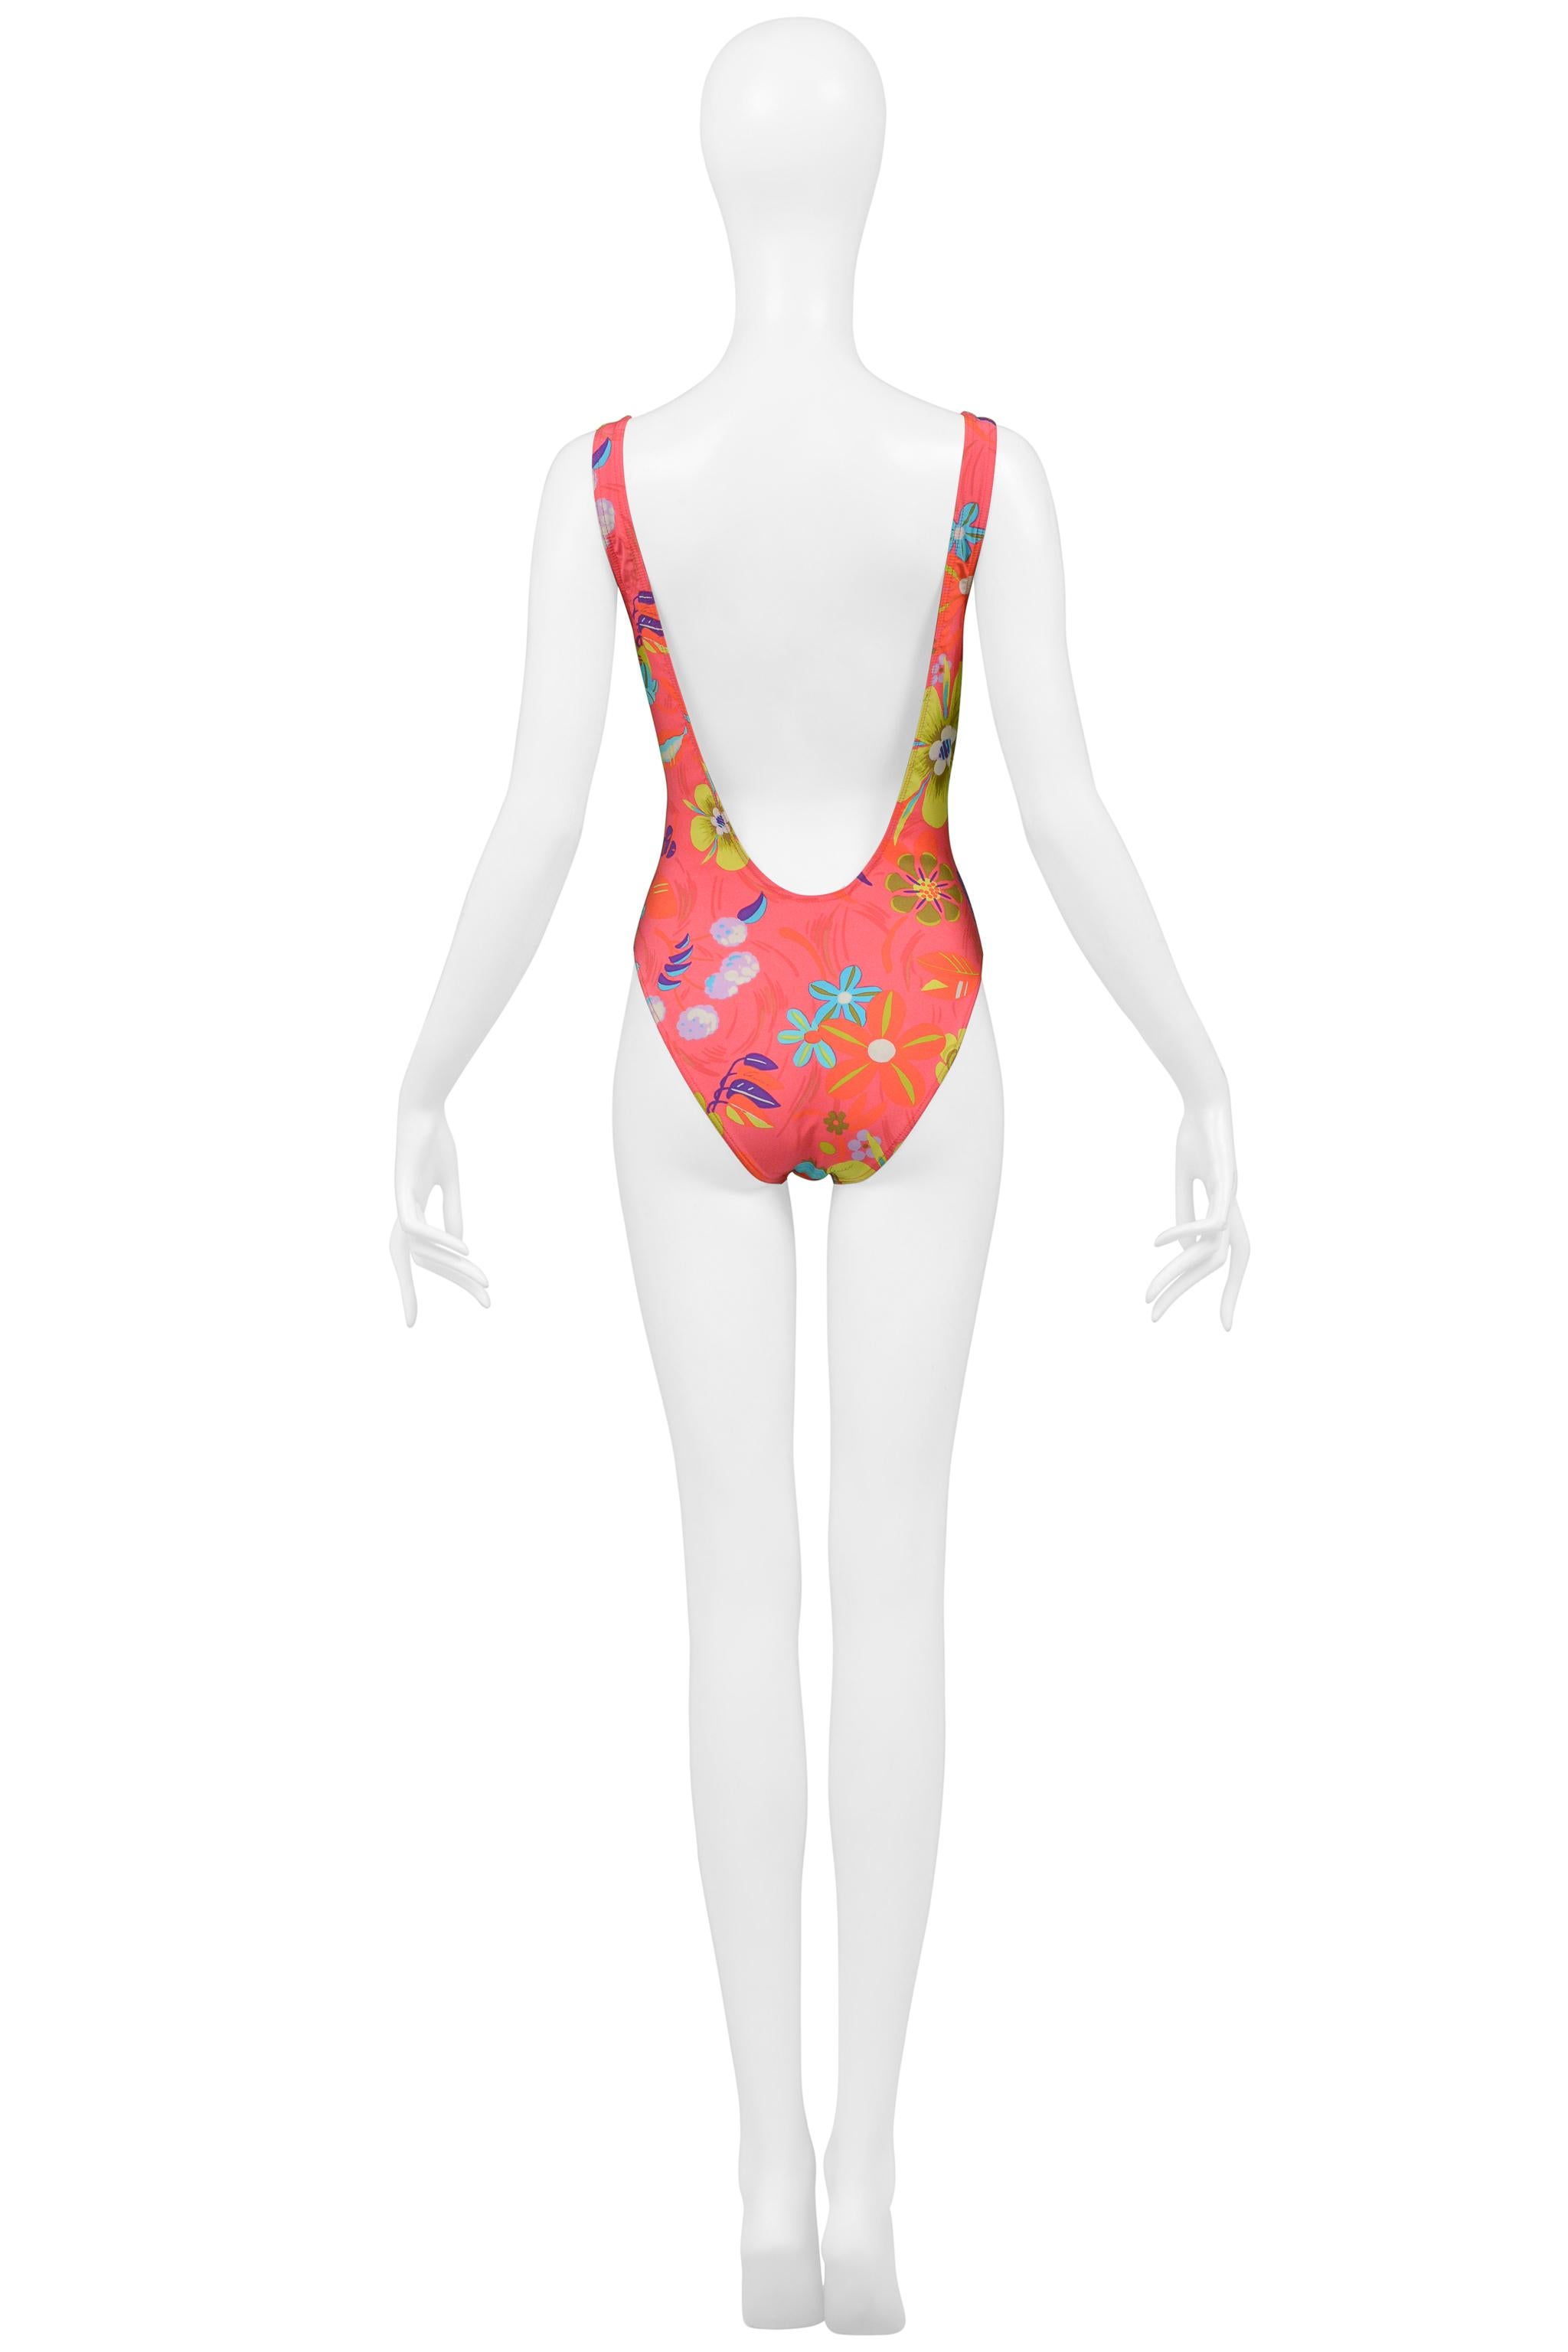 Women's Gucci By Tom Ford Pink Floral Print One Piece Swimsuit 1999